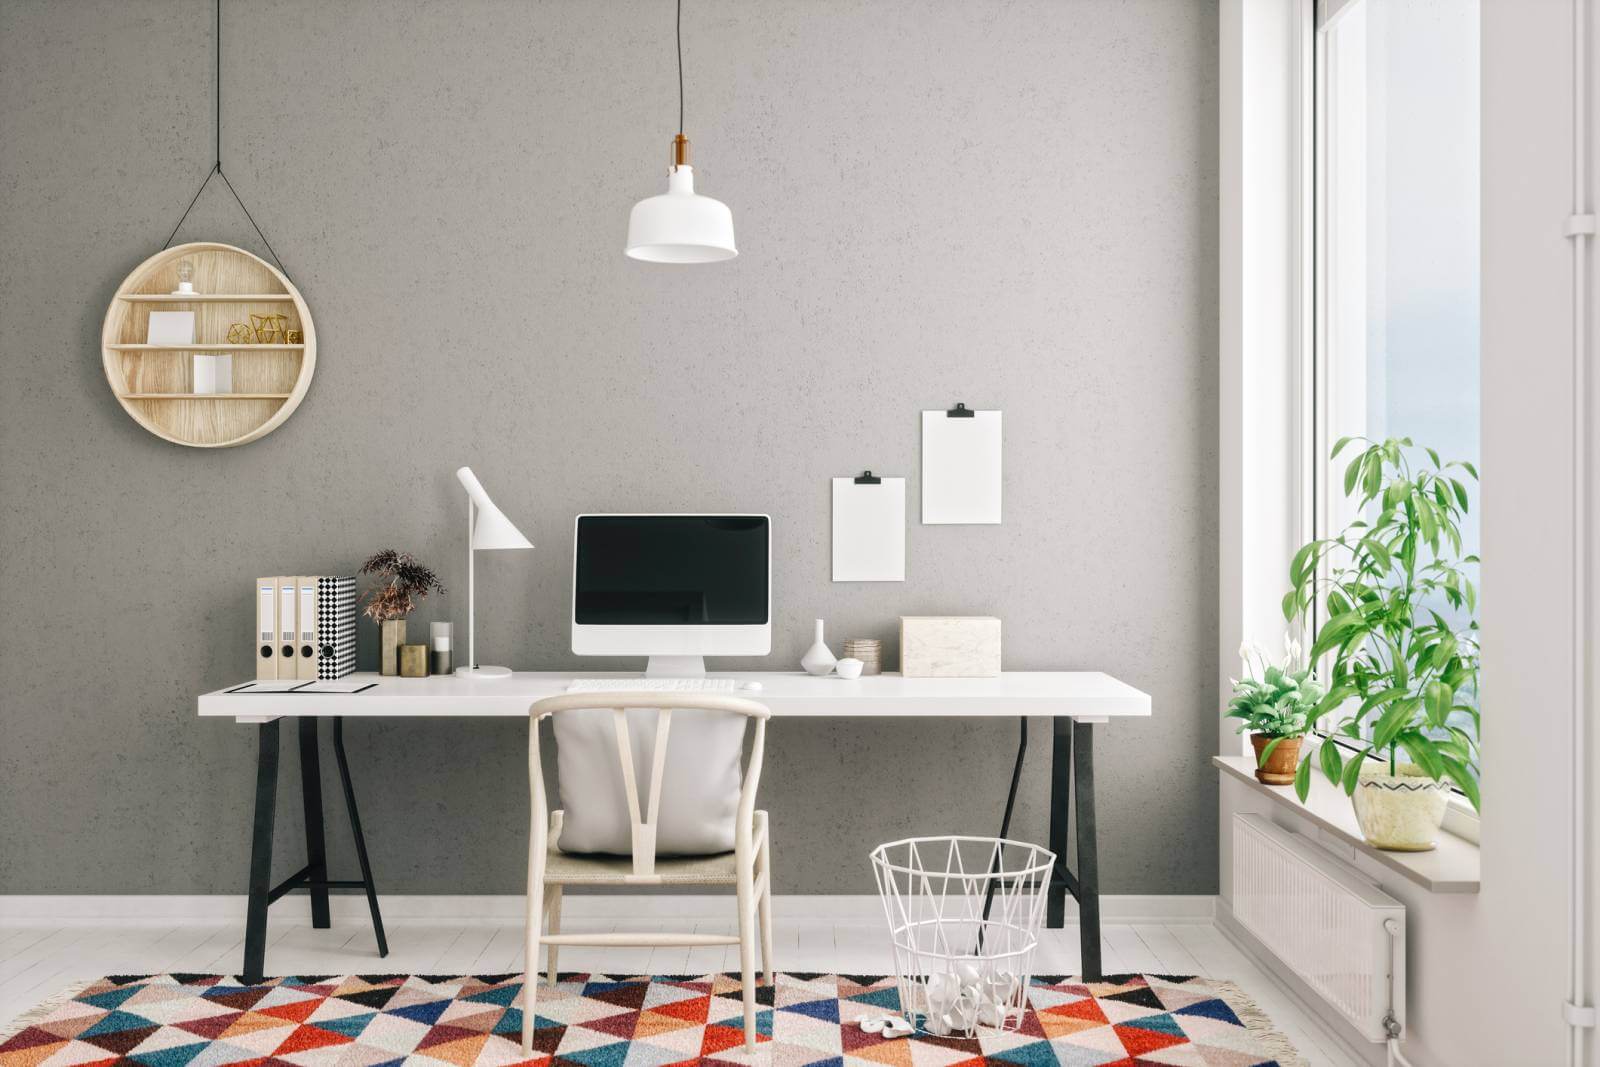 Turning Bedroom Into Home Office – Yes Or No?